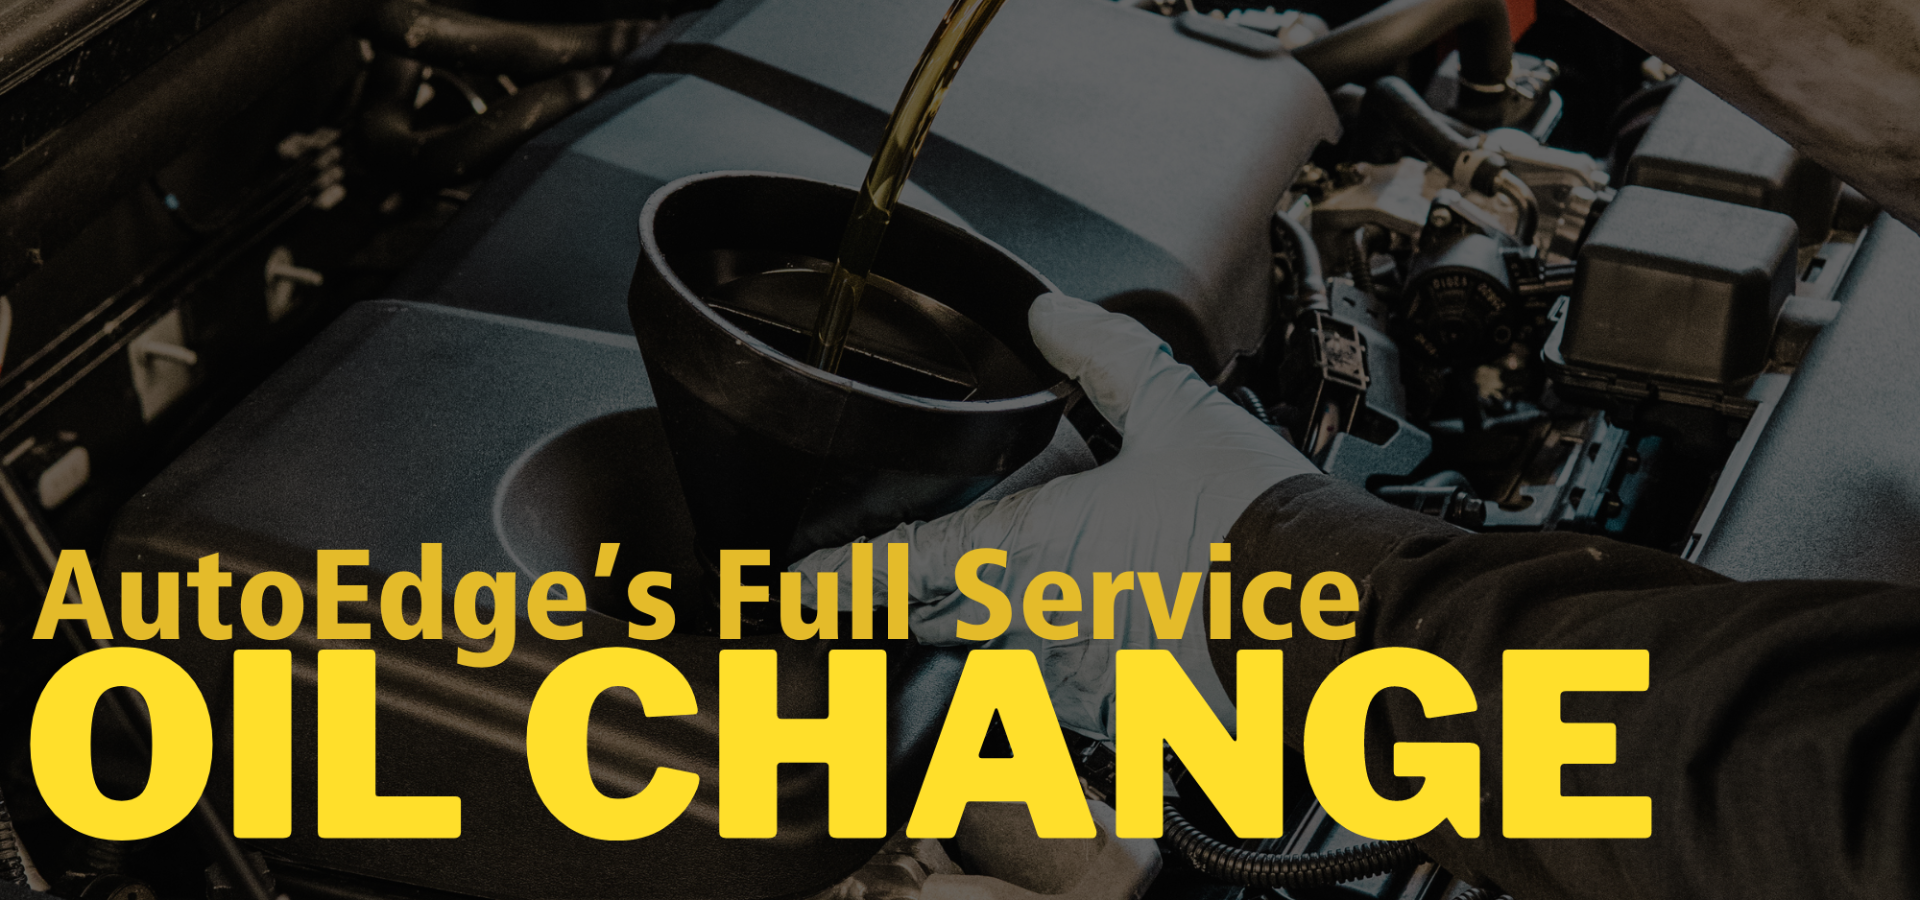 The AutoEdge Full-Service Oil Change Takes About 20 Minutes On Most Vehicles